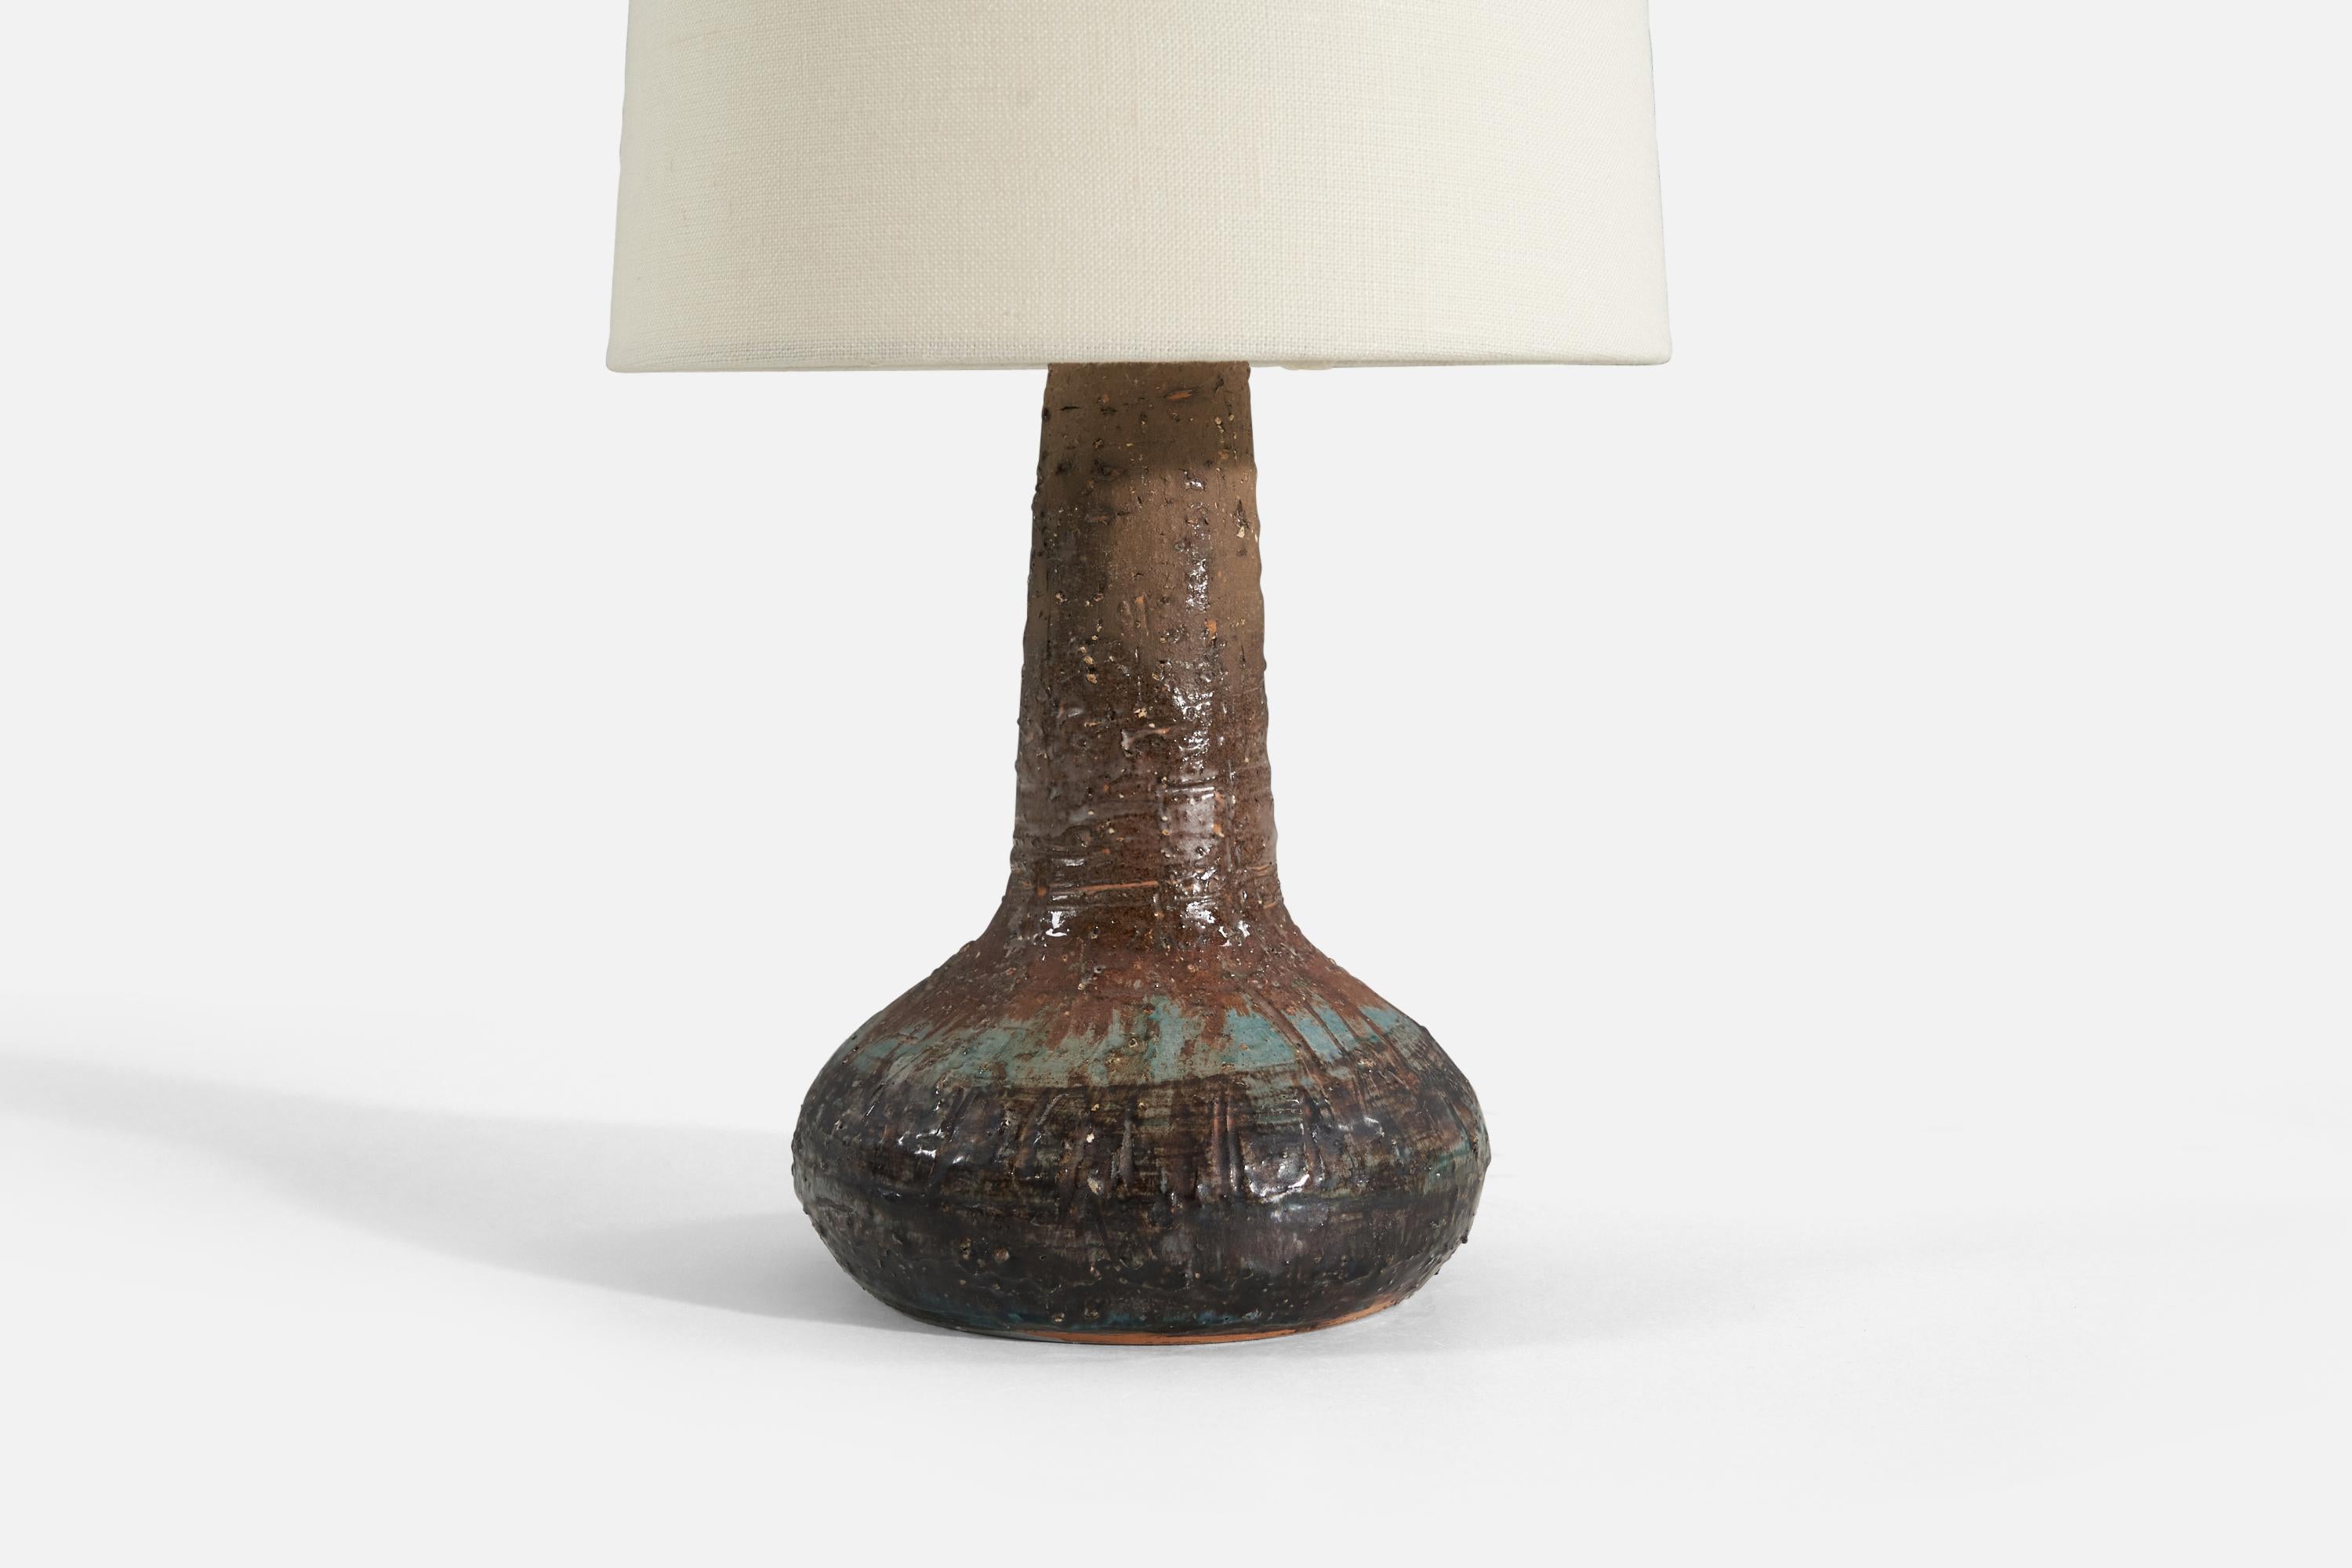 Tilgmans Keramik, Table Lamp, Glazed Incised Stoneware, Sweden, 1960s In Good Condition For Sale In High Point, NC